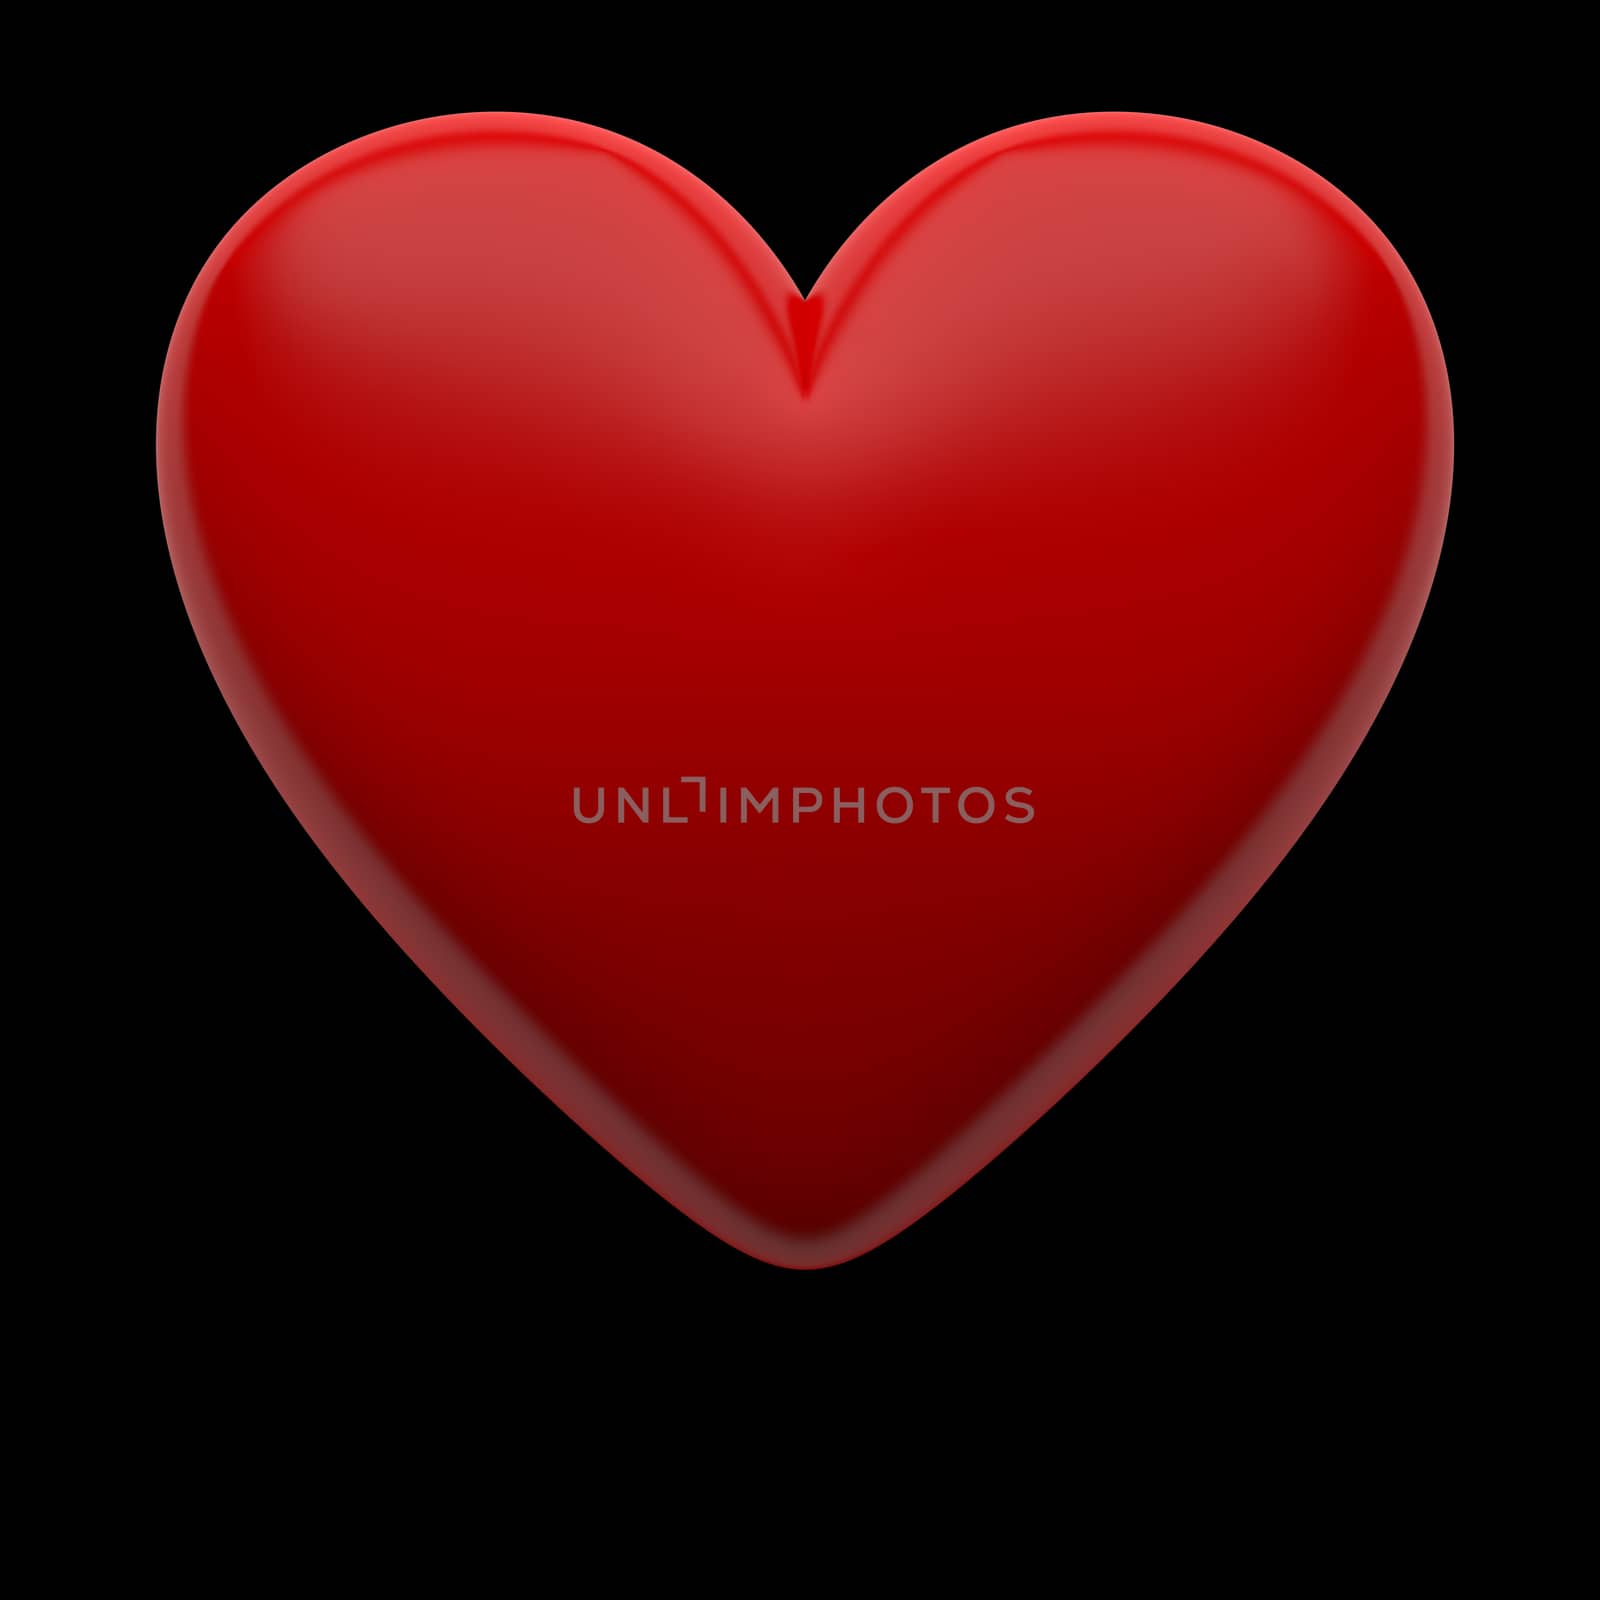 Red 3D heart isolated with clipping path